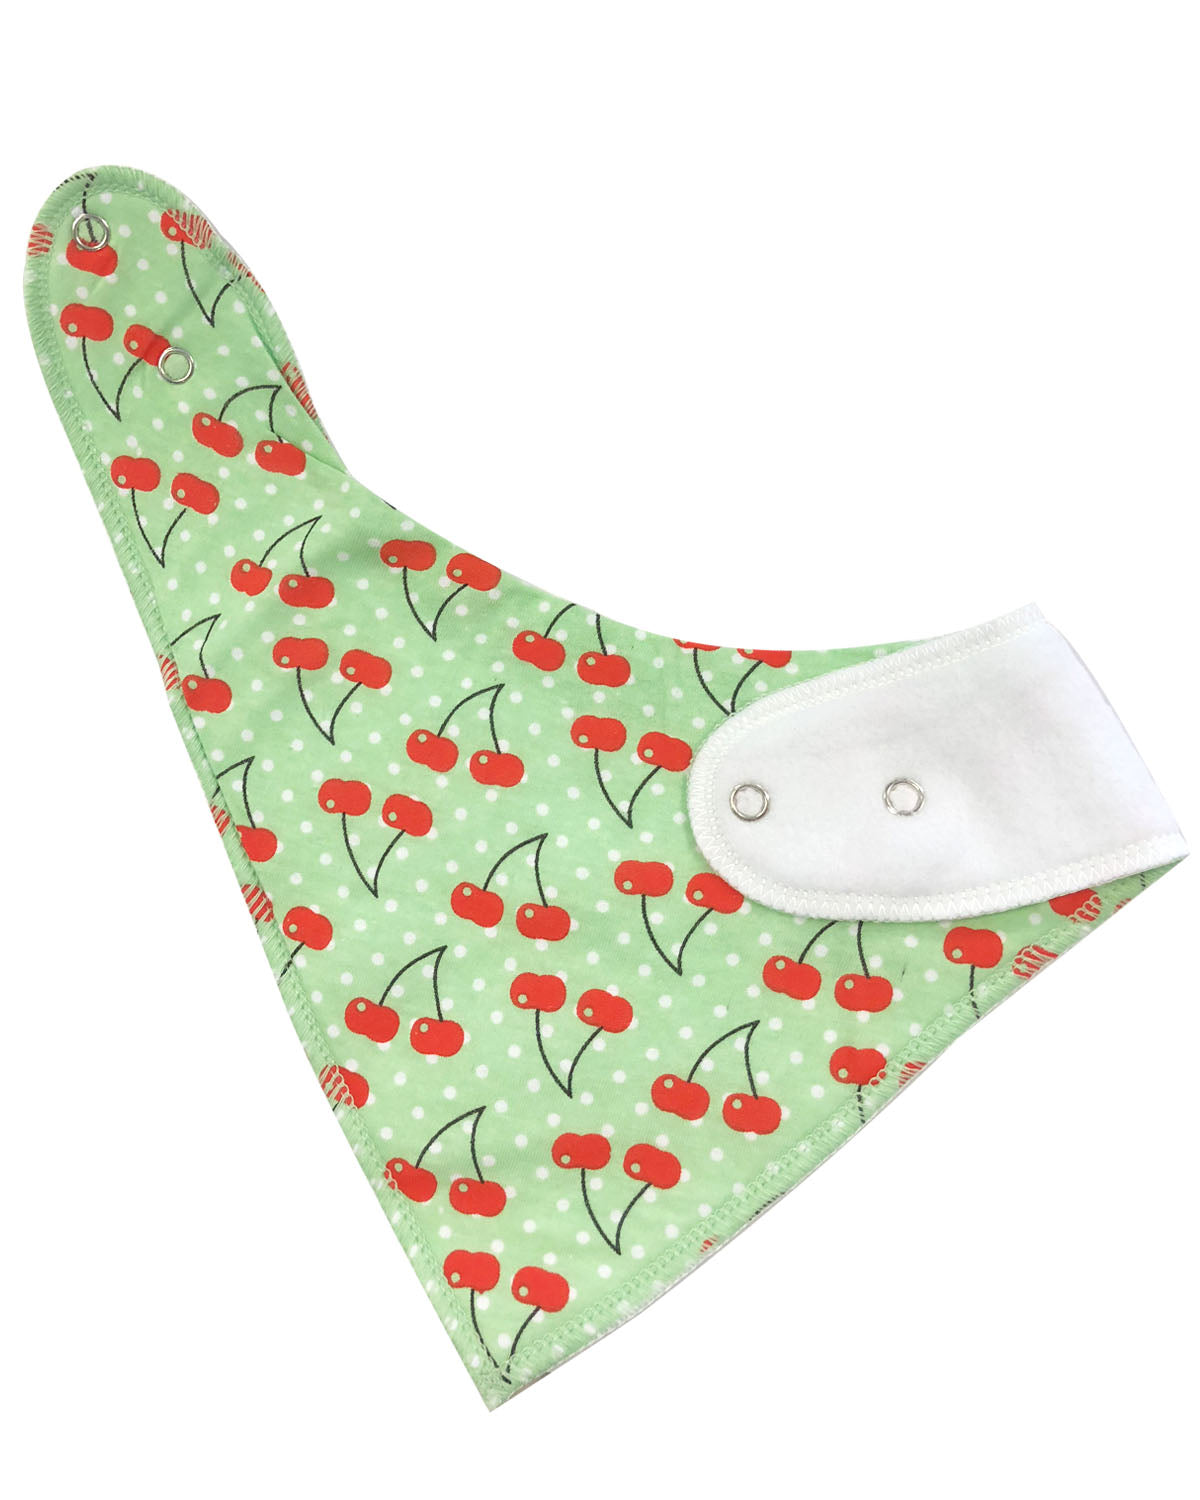 Wrapables Baby Bandana Drool Bibs, Super Soft and Absorbent Bibs for Drooling and Teething (Set 8)